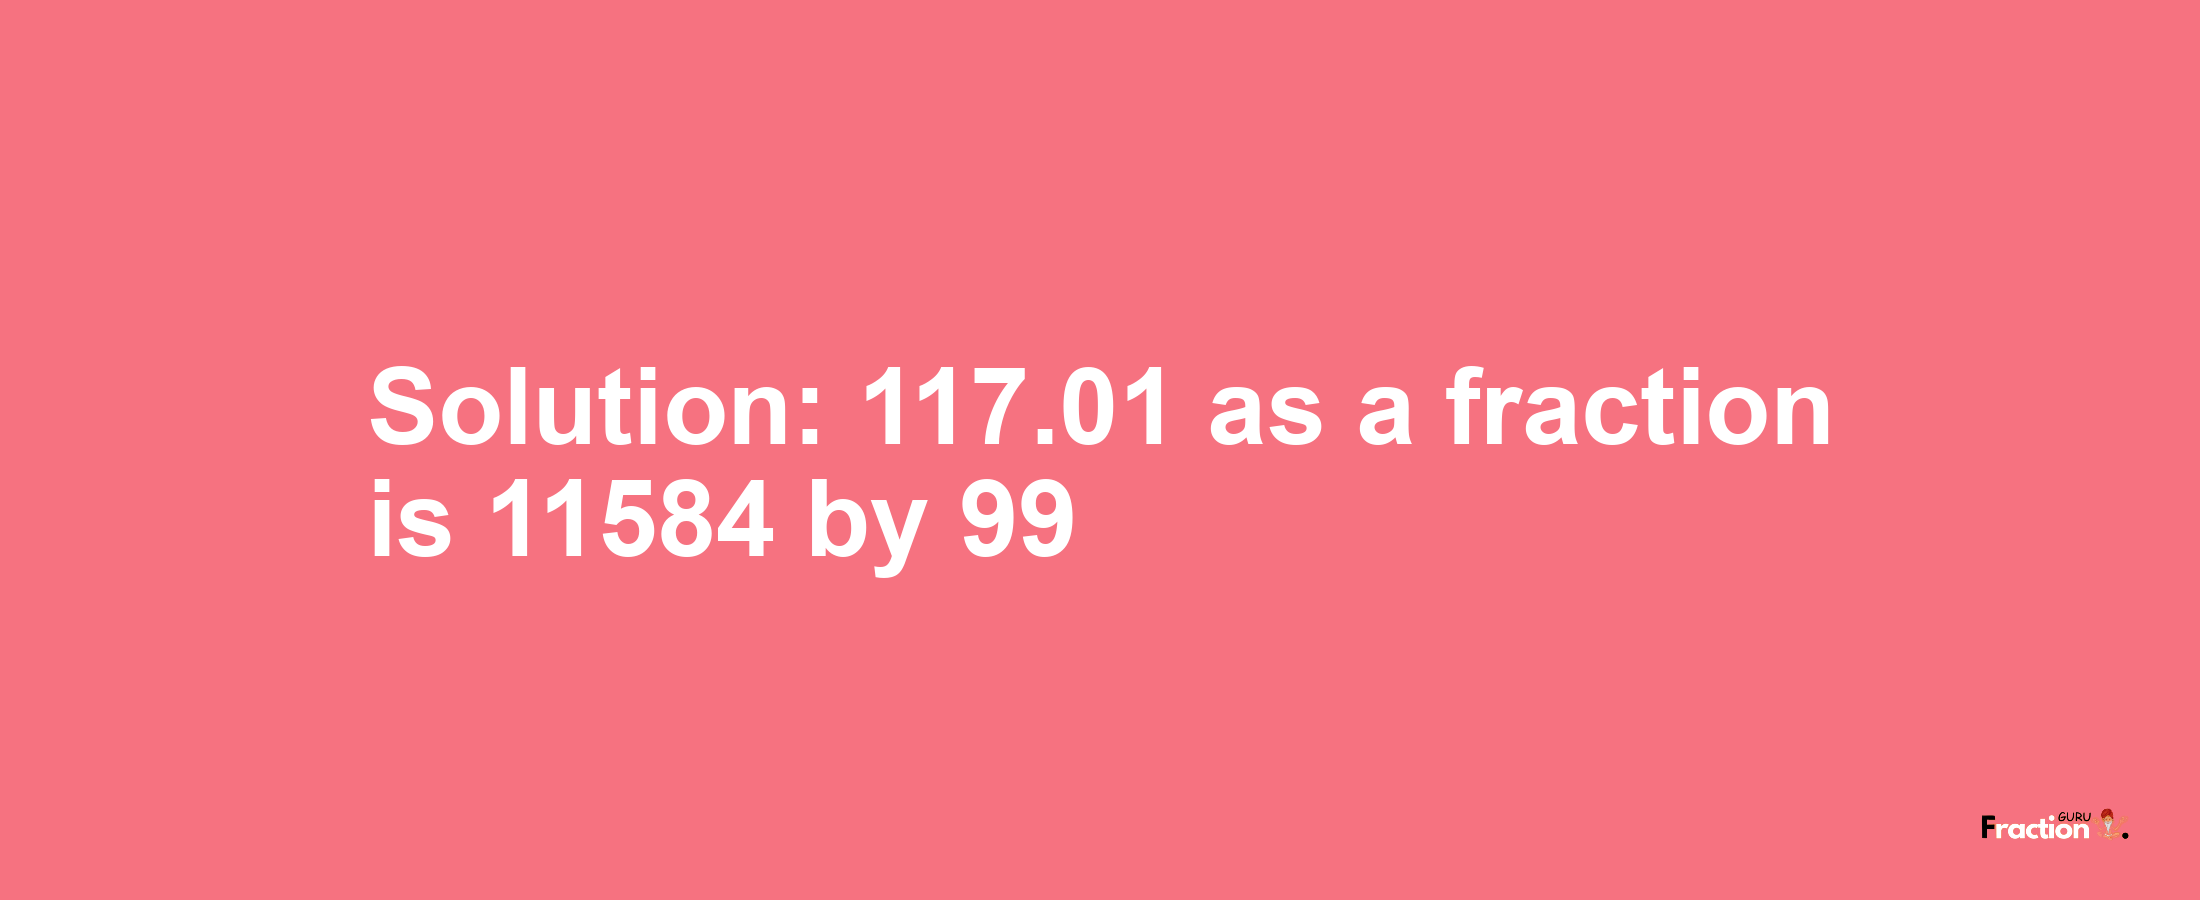 Solution:117.01 as a fraction is 11584/99